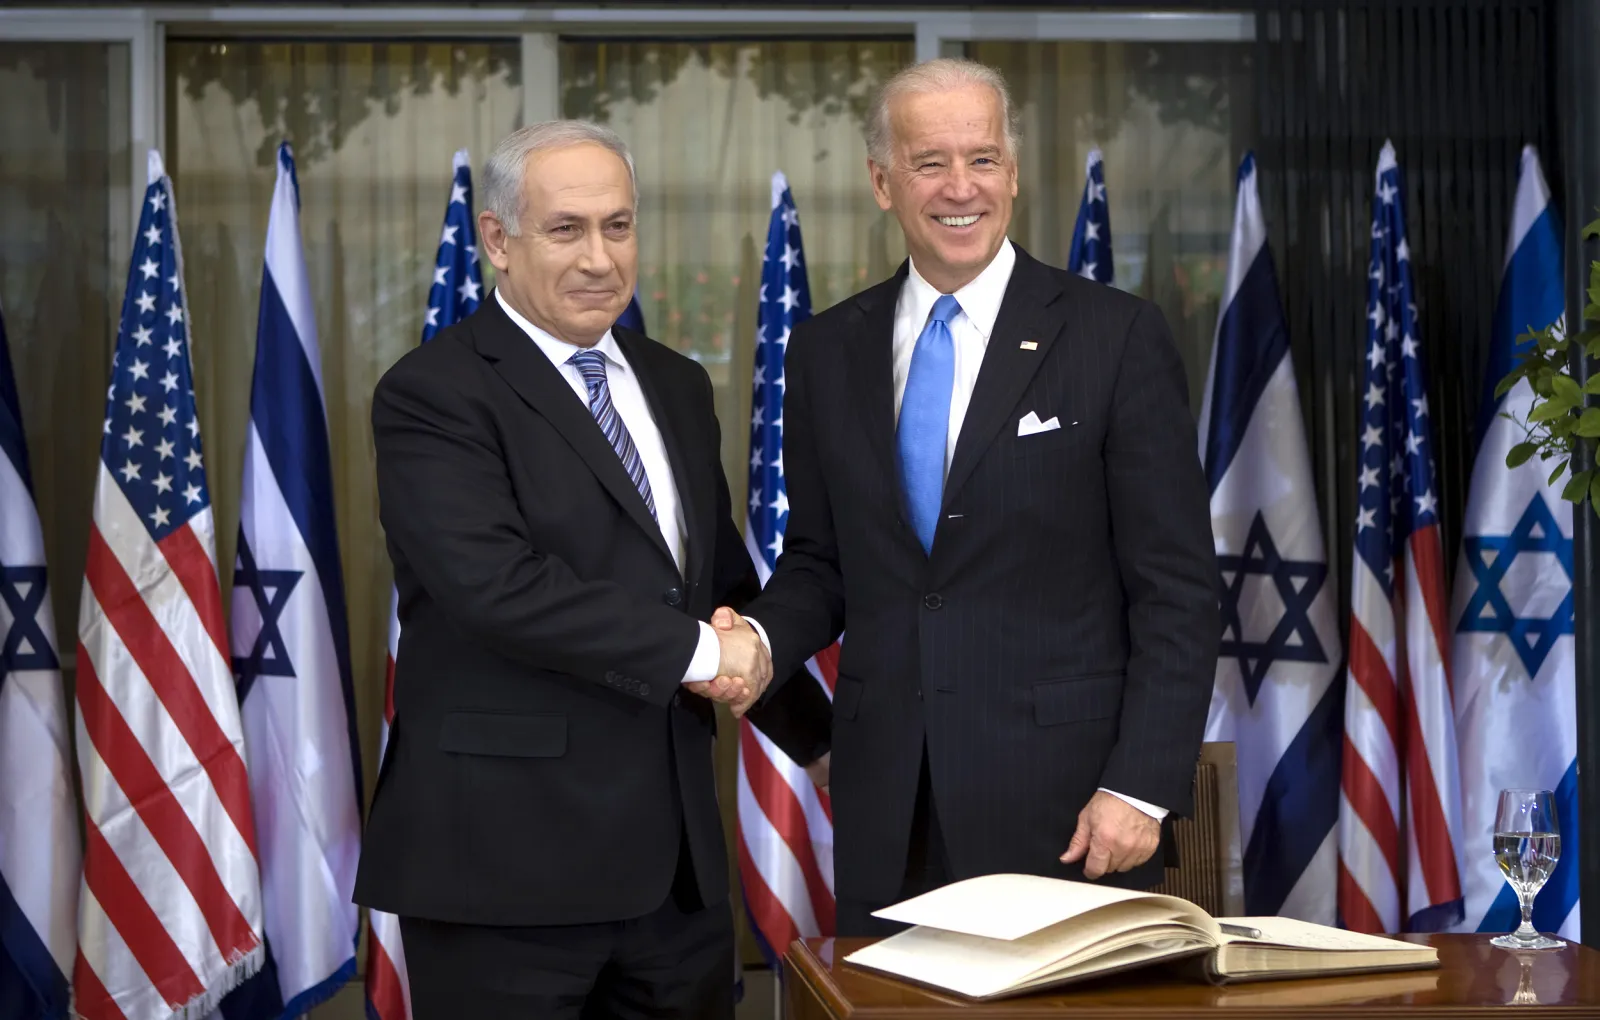 Netanyahu has ceased to be a productive partner for the US Presidential Administration